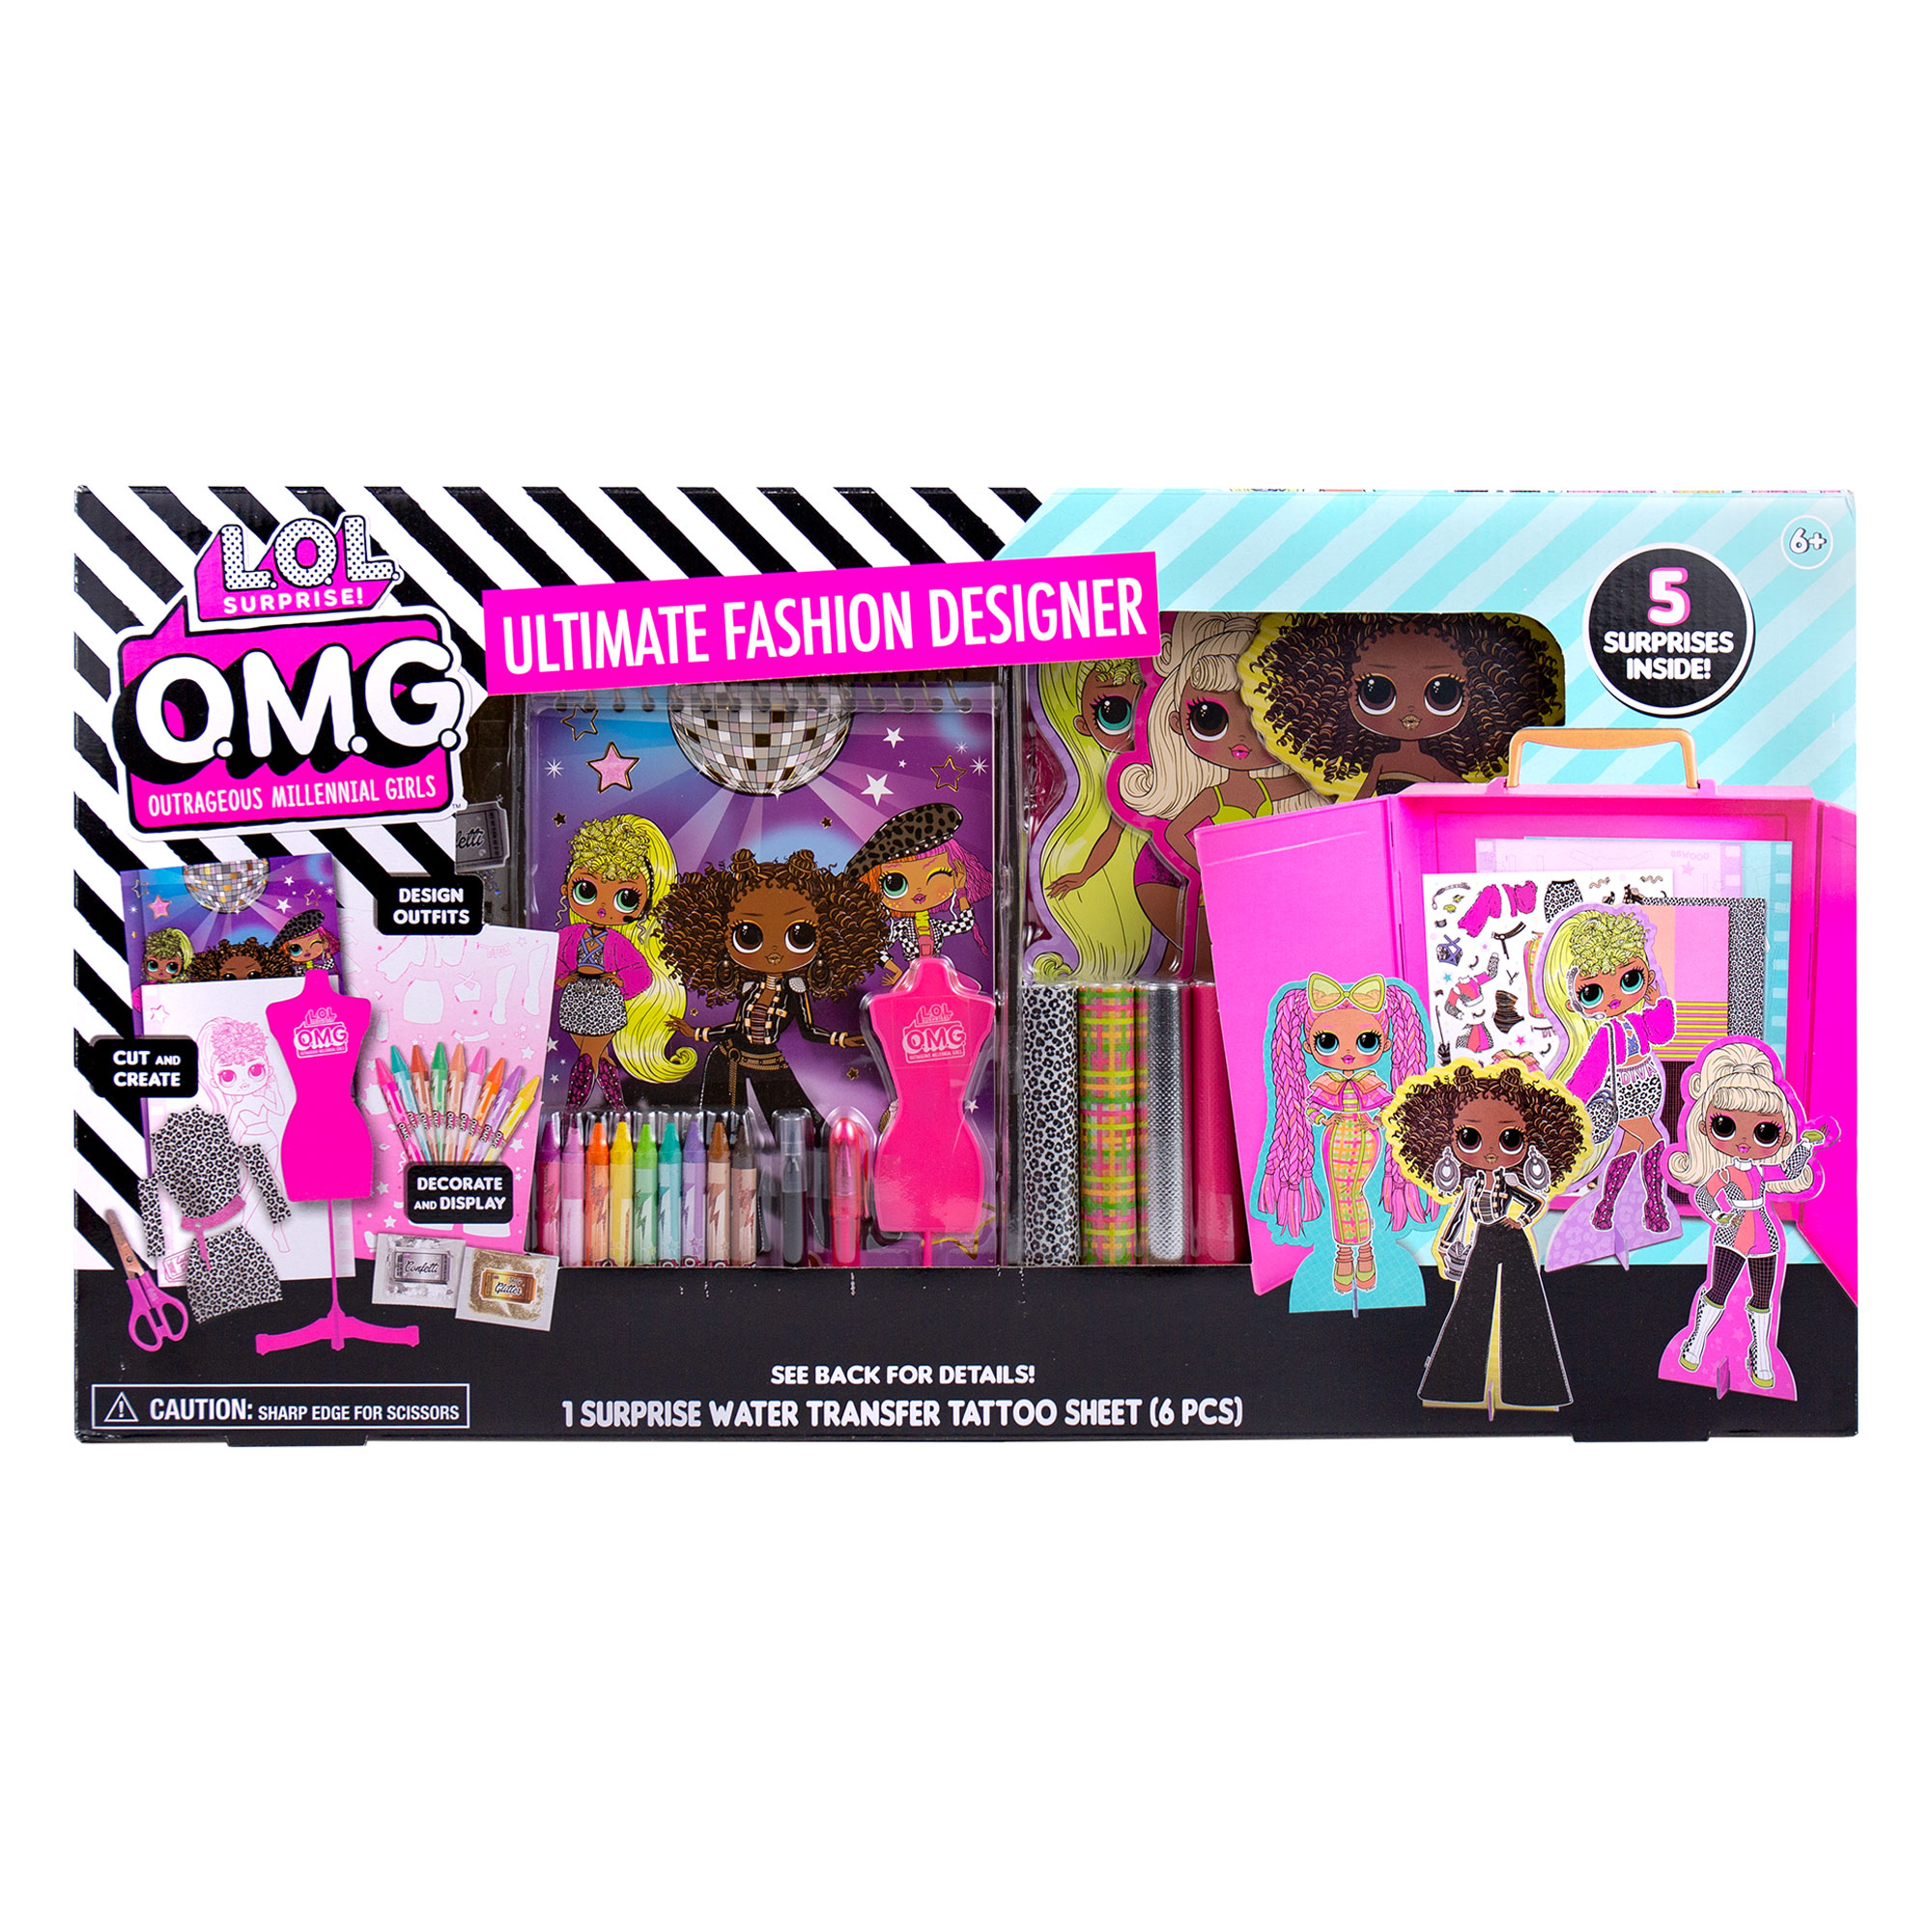 L.O.L. Surprise! O.M.G. Ultimate Fashion Designer, Double Feature Series, Decorate 4 Die-Cut Dolls With 300+ Accessories, 5 Surprises Inside, Includes Reusable Runway Case - image 1 of 5